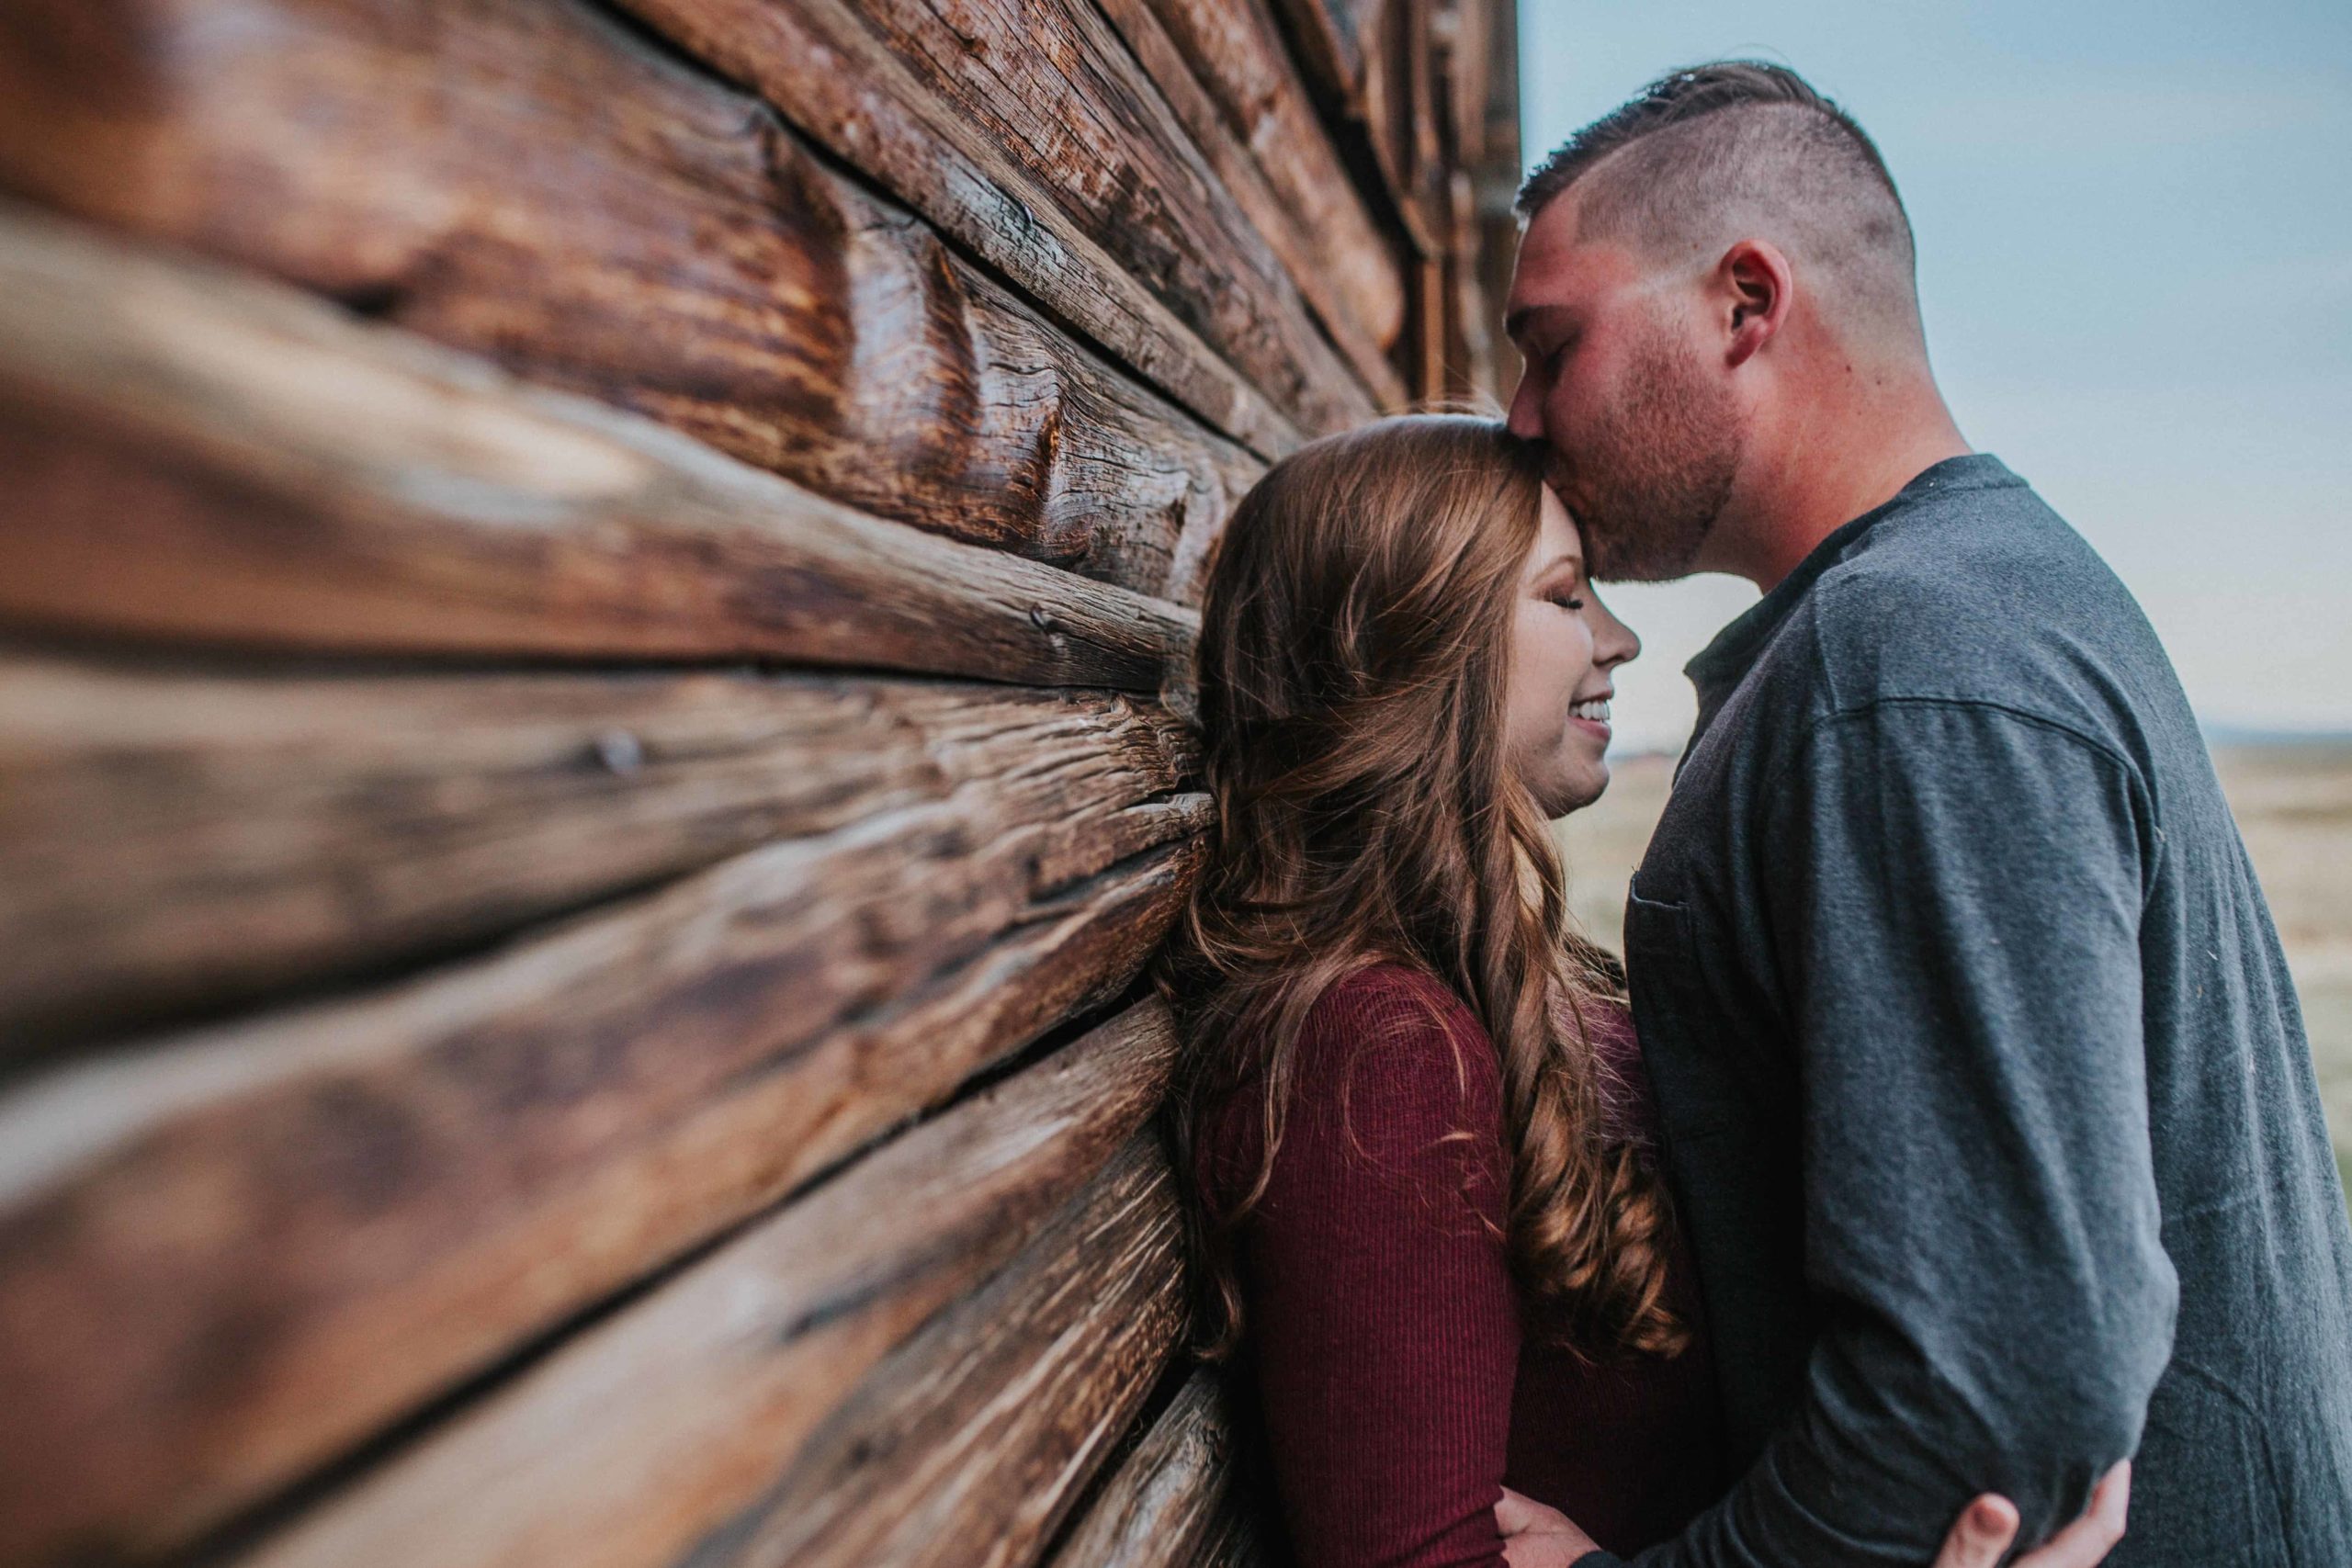 husband kissing wife on the forehead against the cabin in the winter